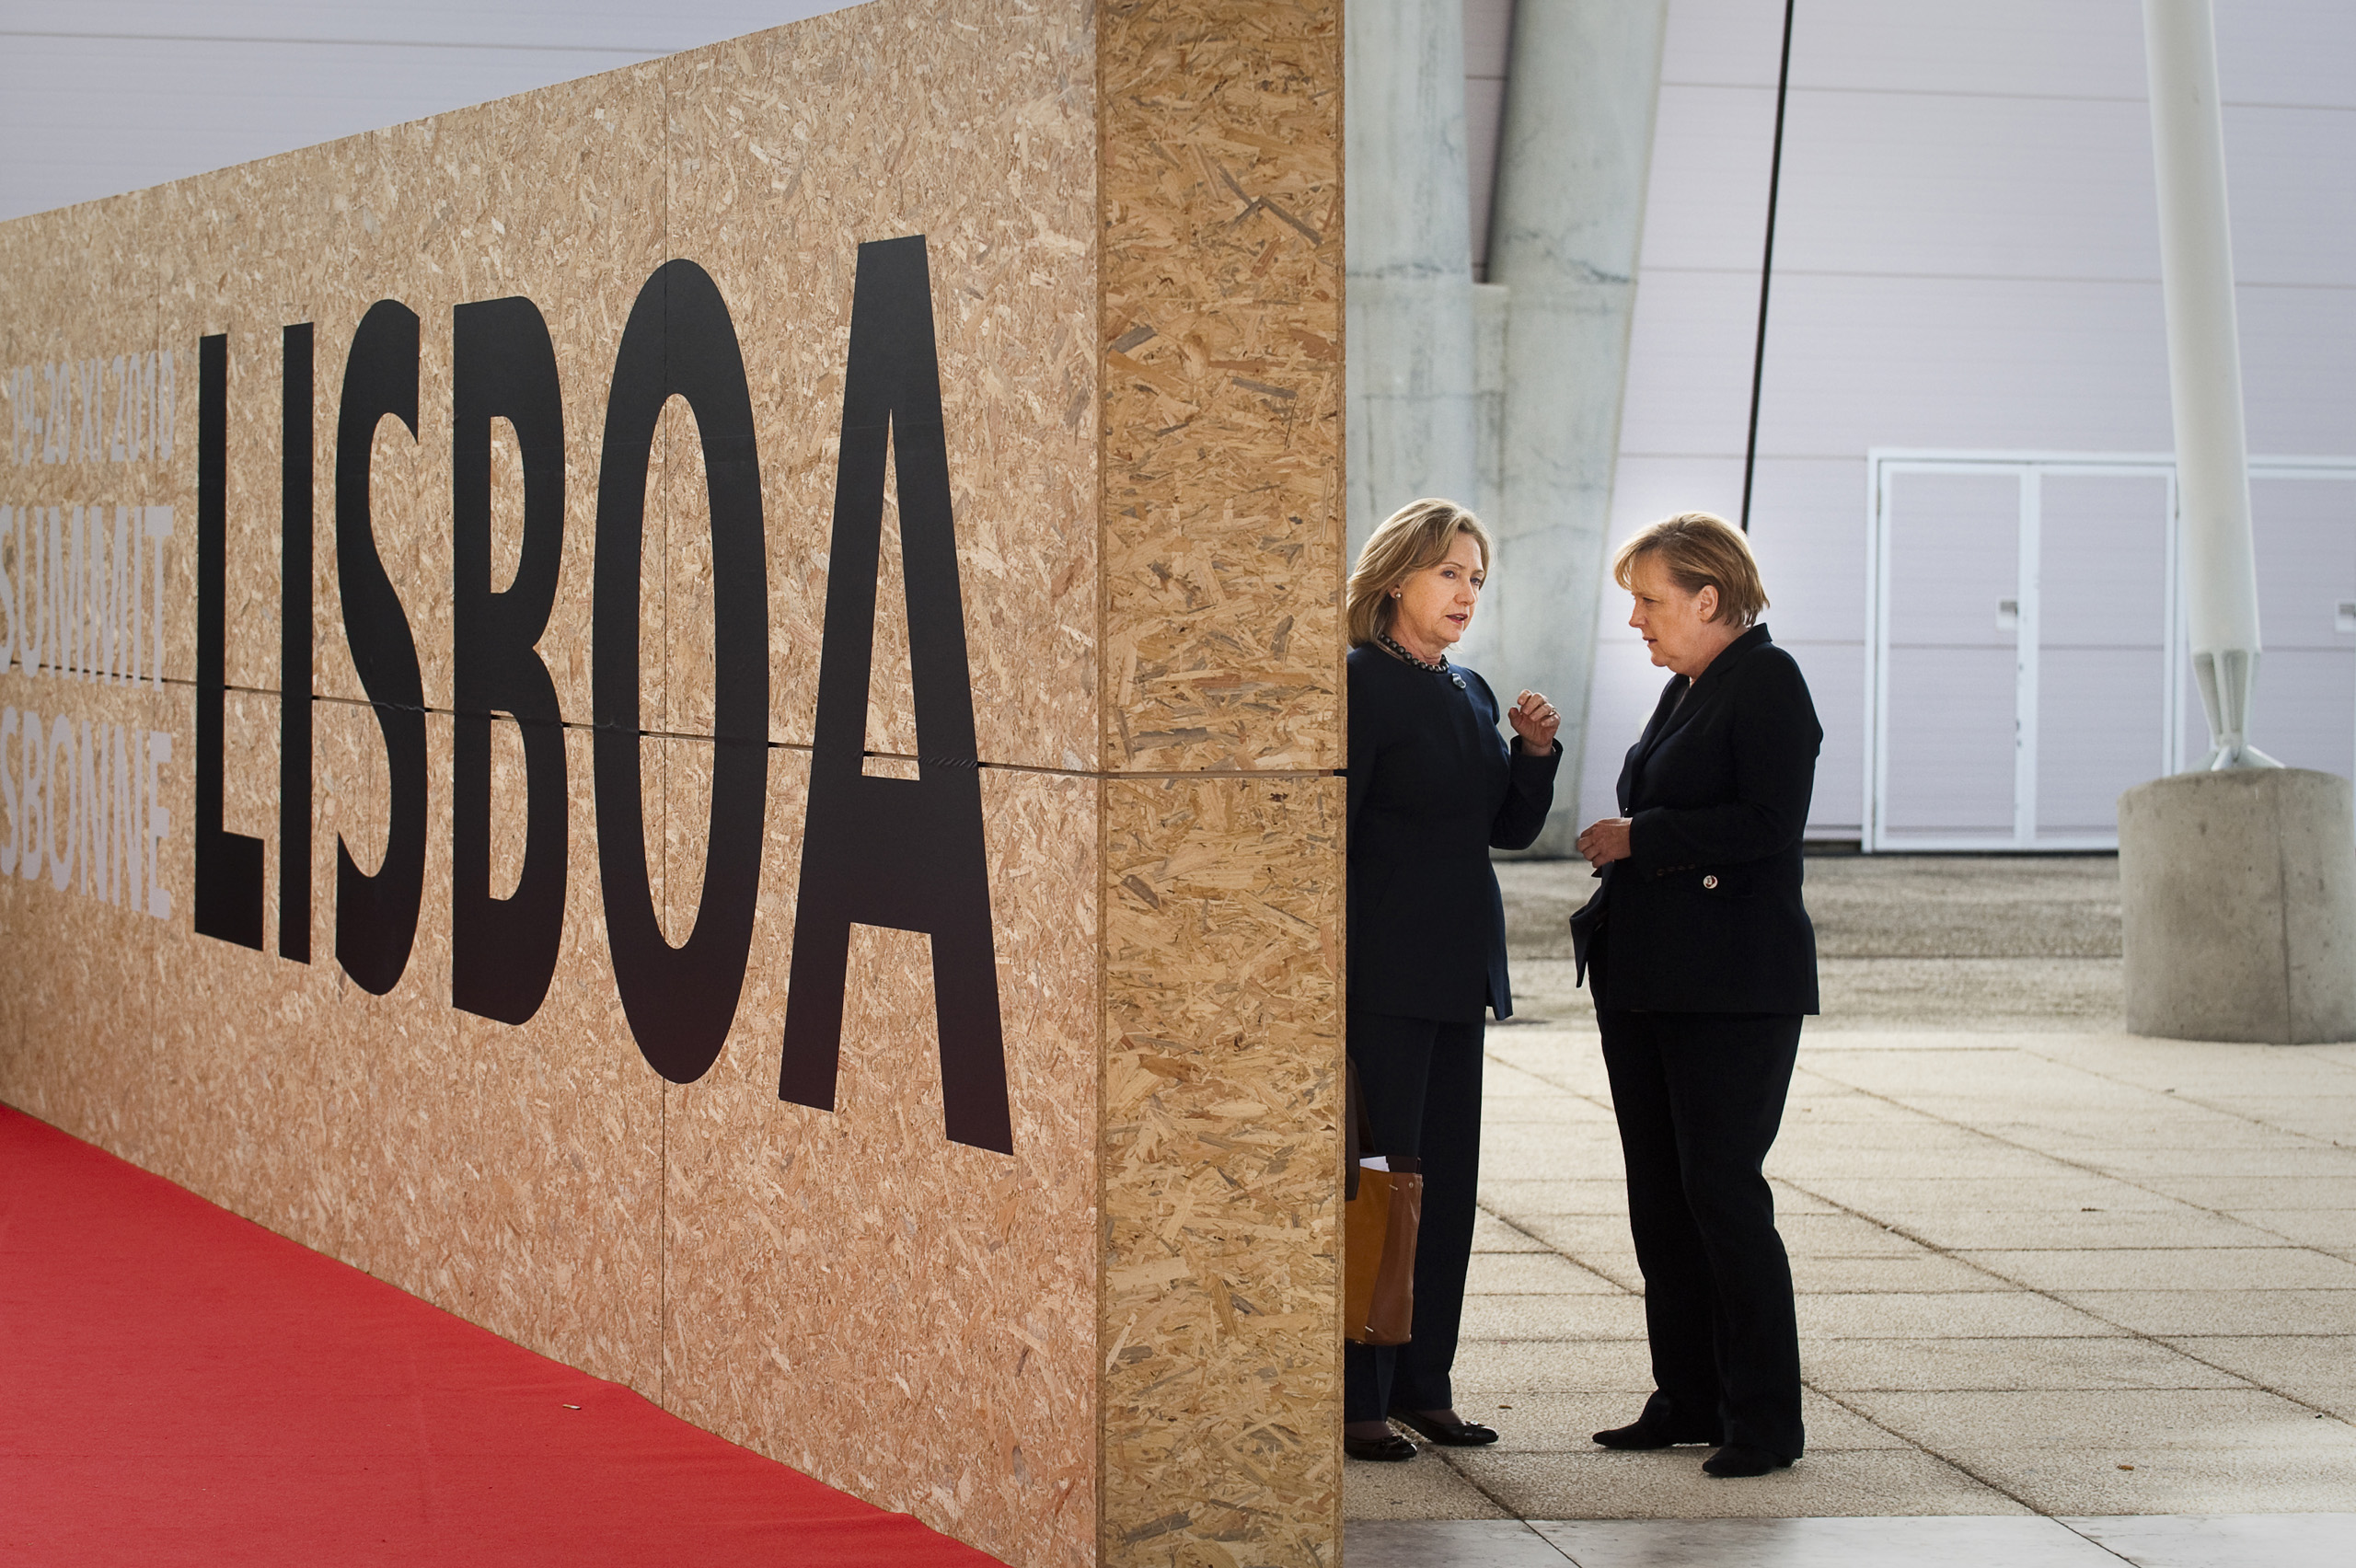 Chancellor Angela Merkel shares a conversation with the then Secretary of State, Hillary Clinton at the NATO Summit in Lisbon. Nov. 20, 2010.